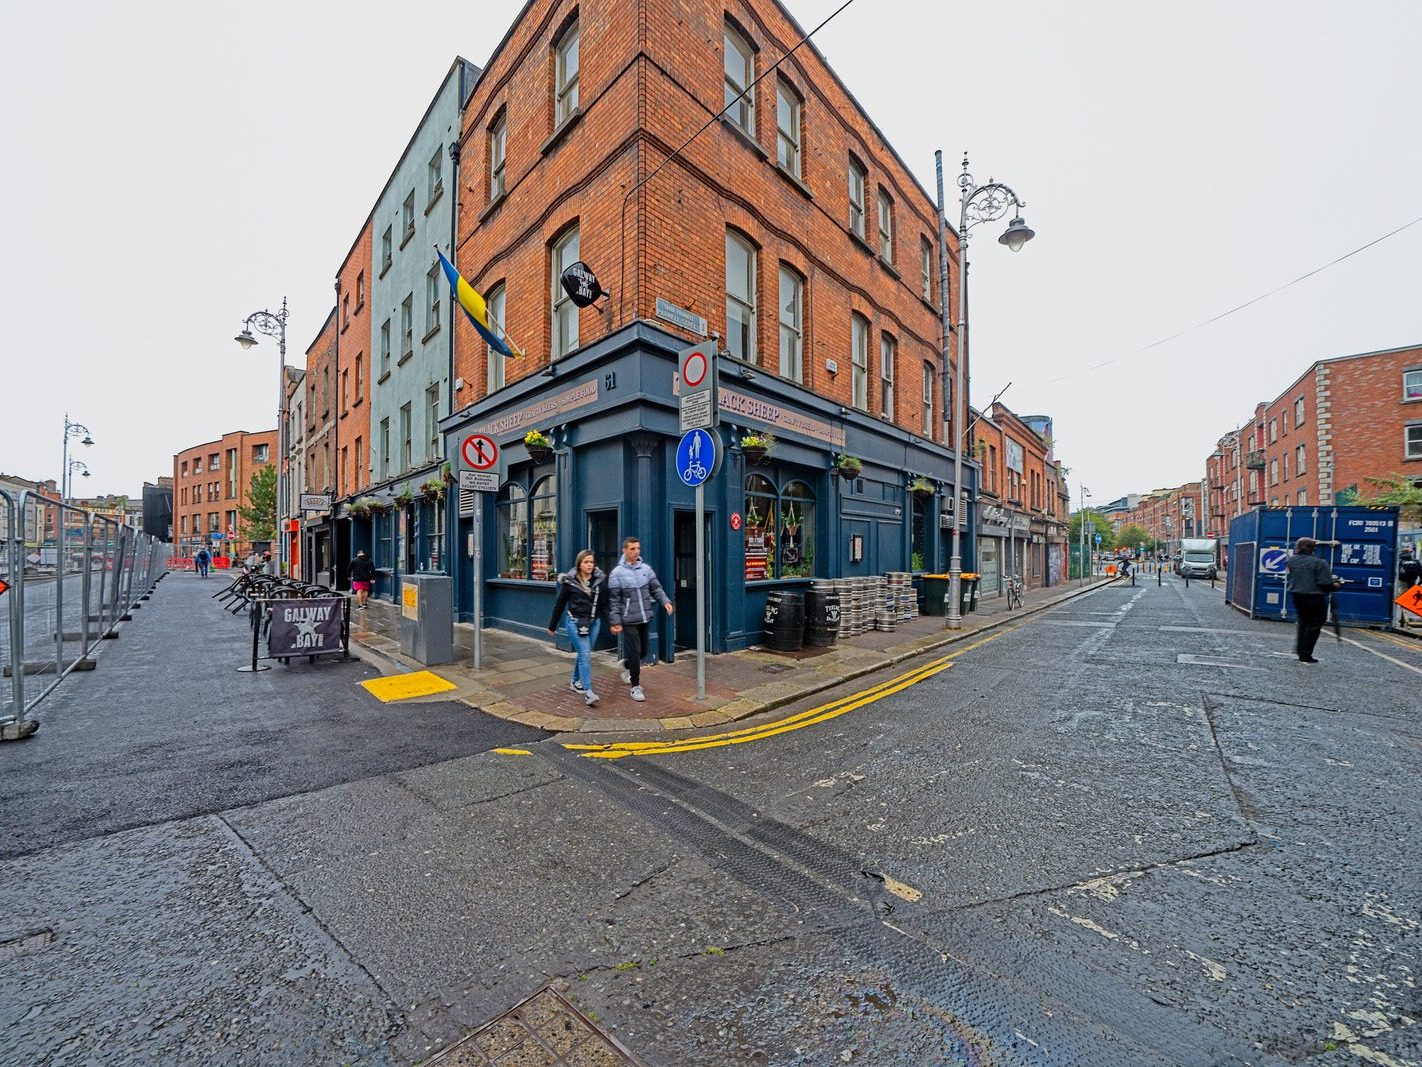 CAPEL STREET ON A DULL WET DAY [INTERIM CAPEL STREET IMPROVEMENT WORKS ARE NOW ONGOING] 034